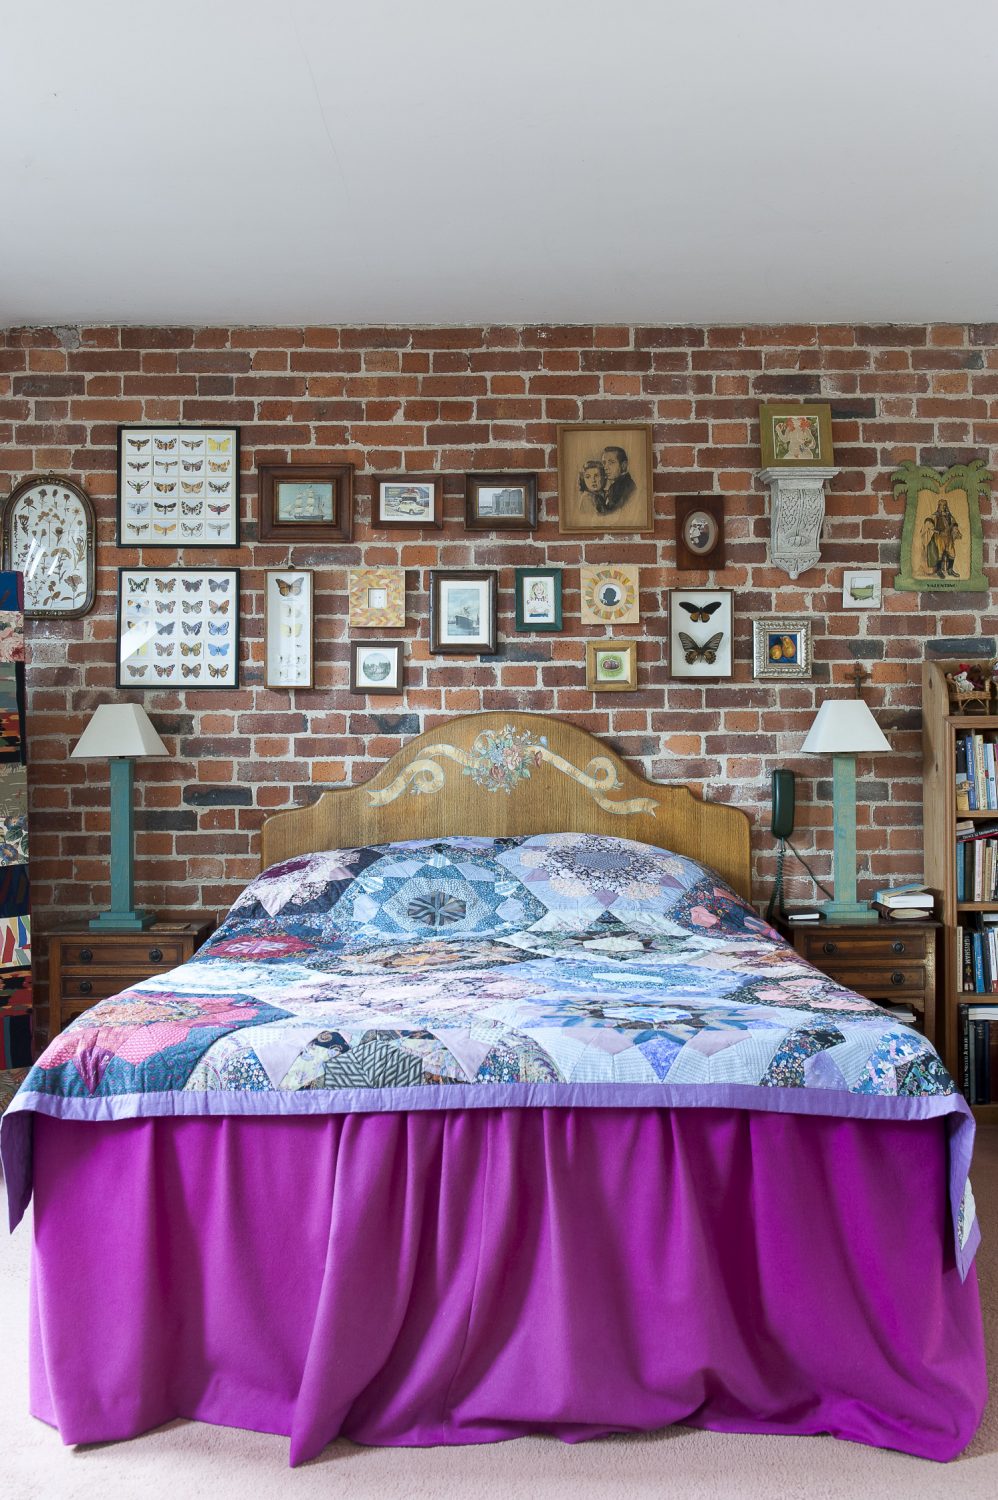 Collections of framed butterflies and portraits line the bare brick wall in the master bedroom. The quilt was handmade locally